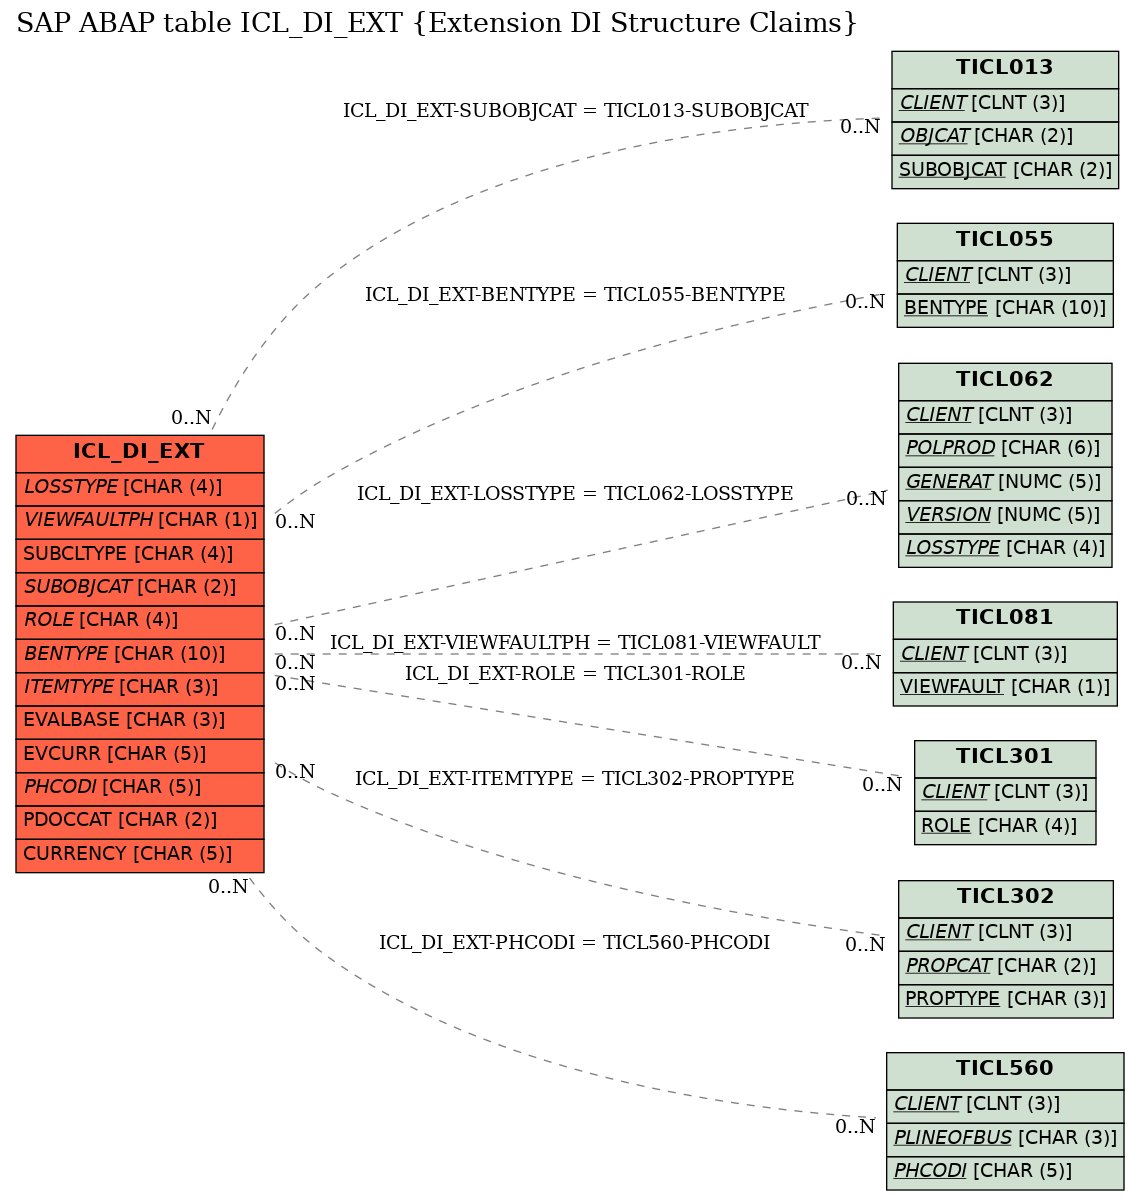 E-R Diagram for table ICL_DI_EXT (Extension DI Structure Claims)